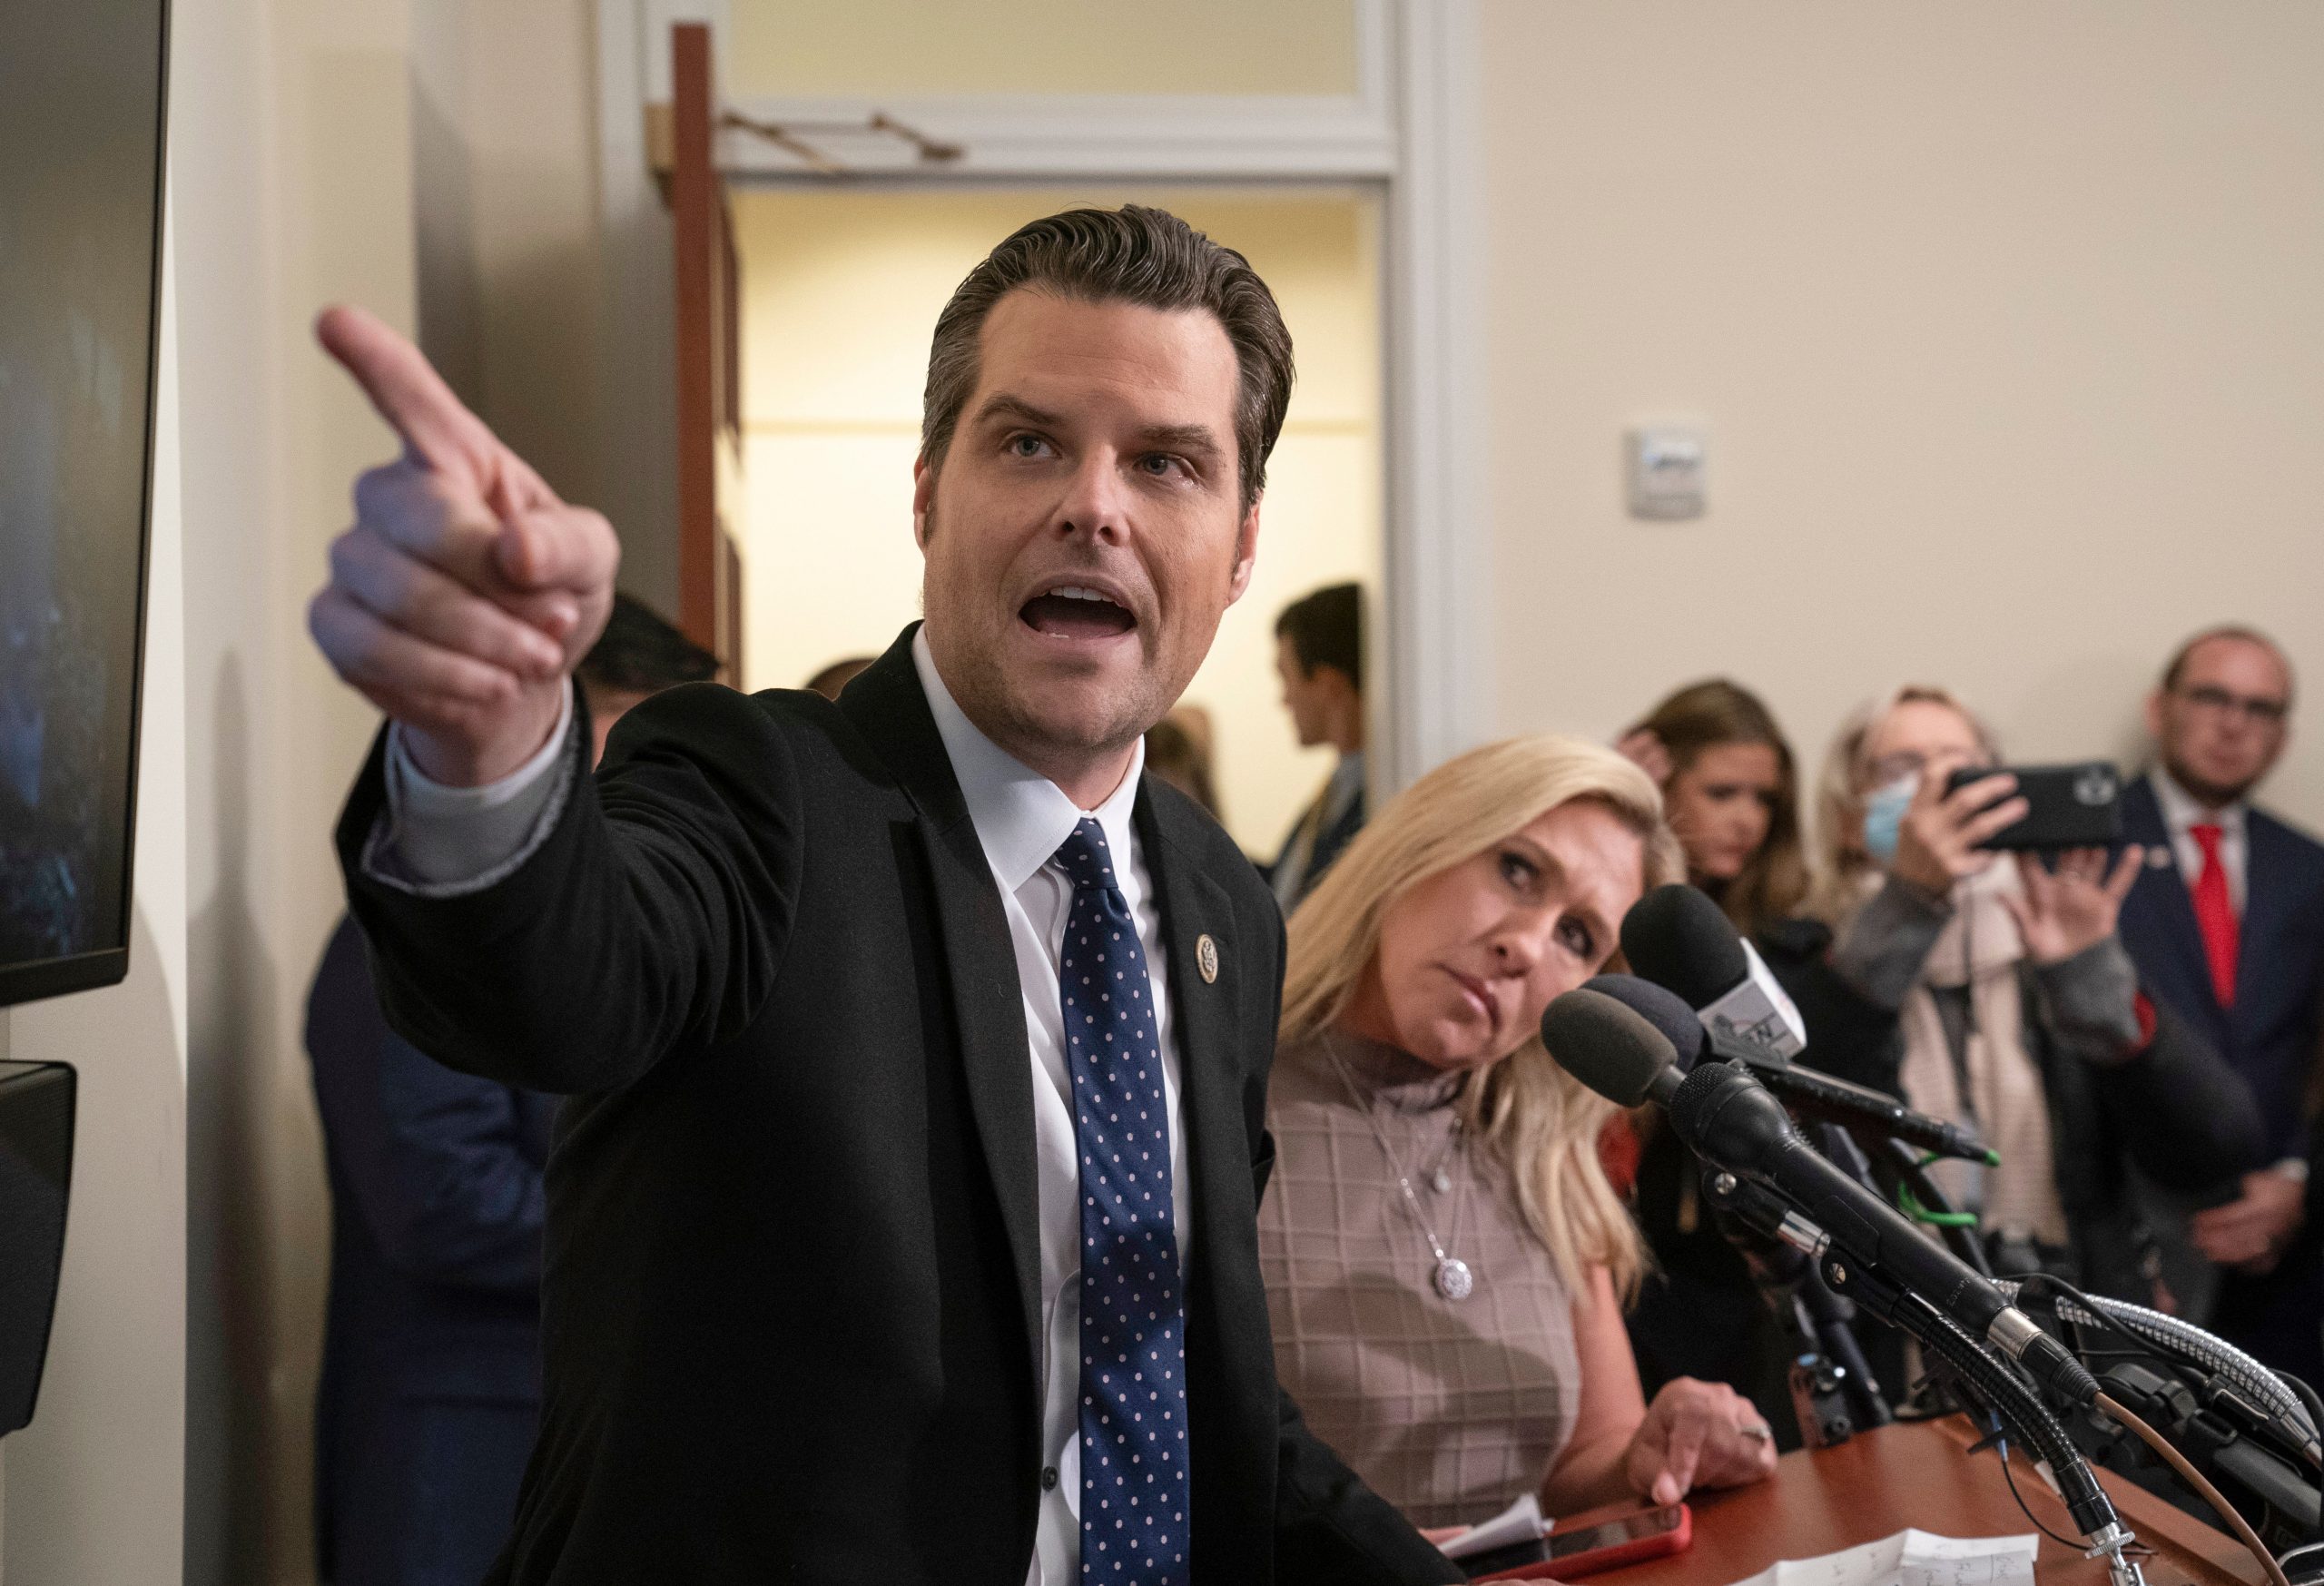 Greene, Gaetz mock Ted Cruz for labelling January 6 rioters as terrorists